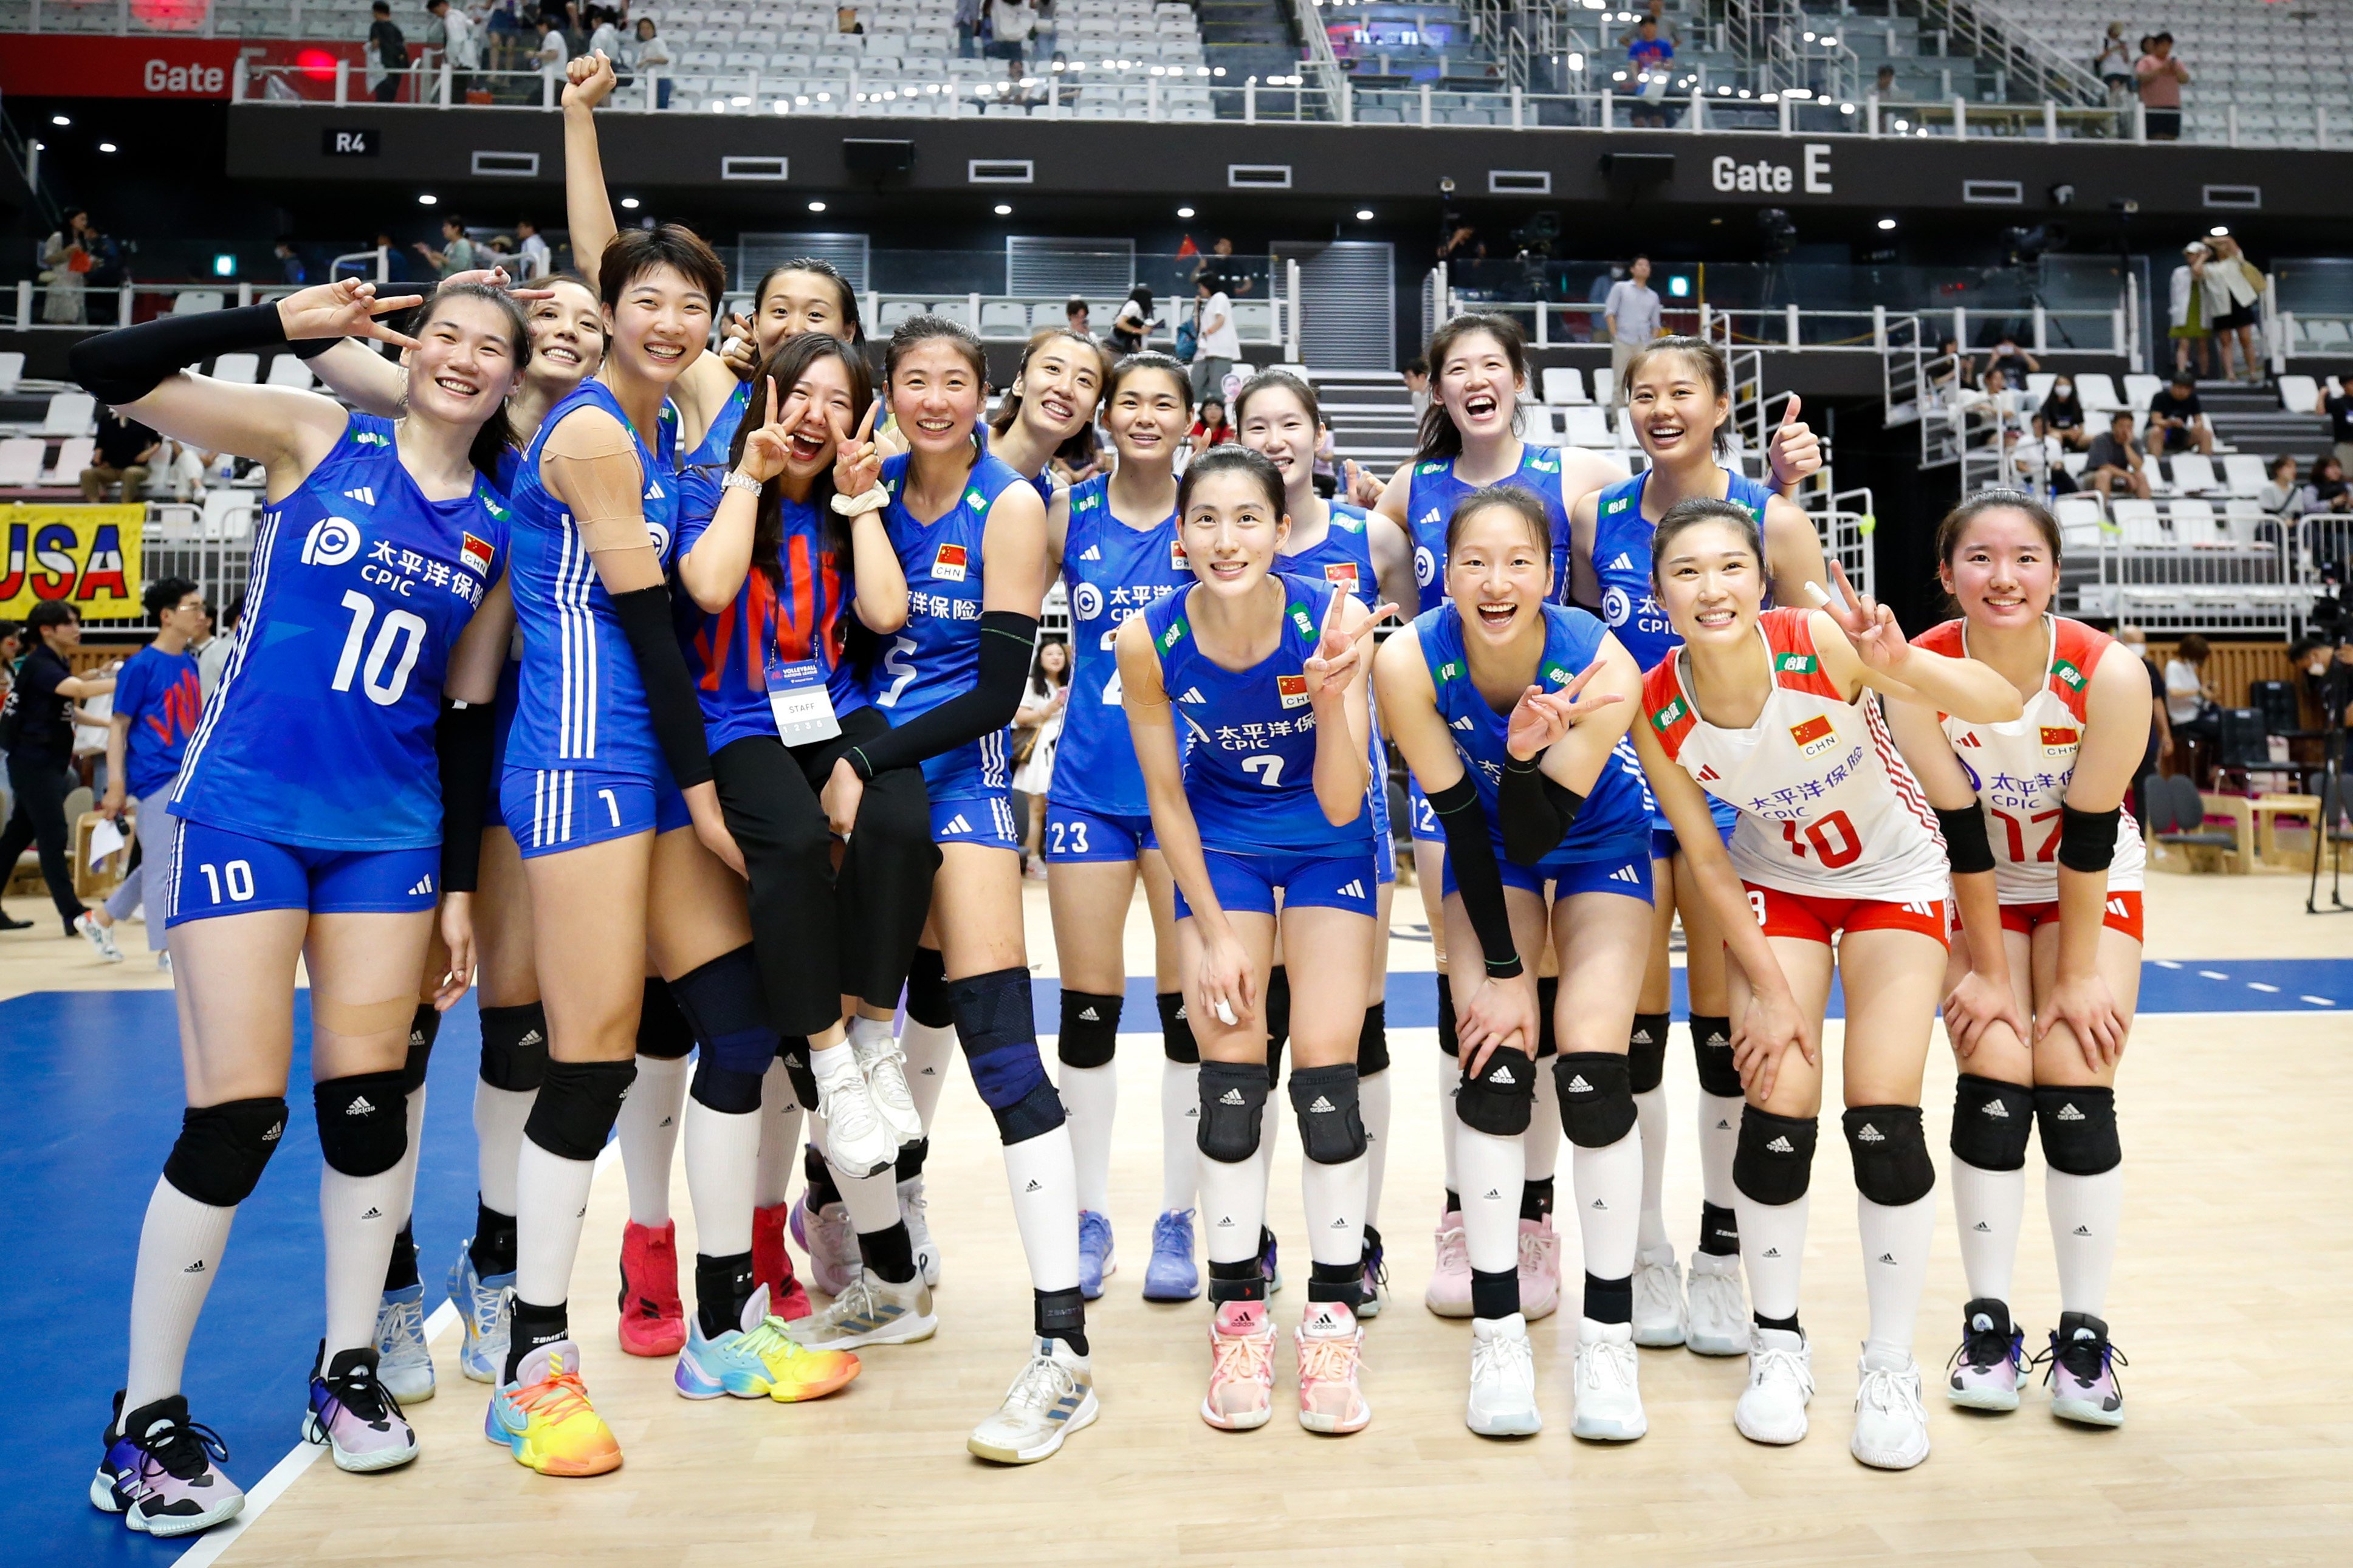 China’s players pose for photos after winning the 2023 Volleyball Nations League match against theUnited States in Suwon, South Korea. Photo: Xinhua